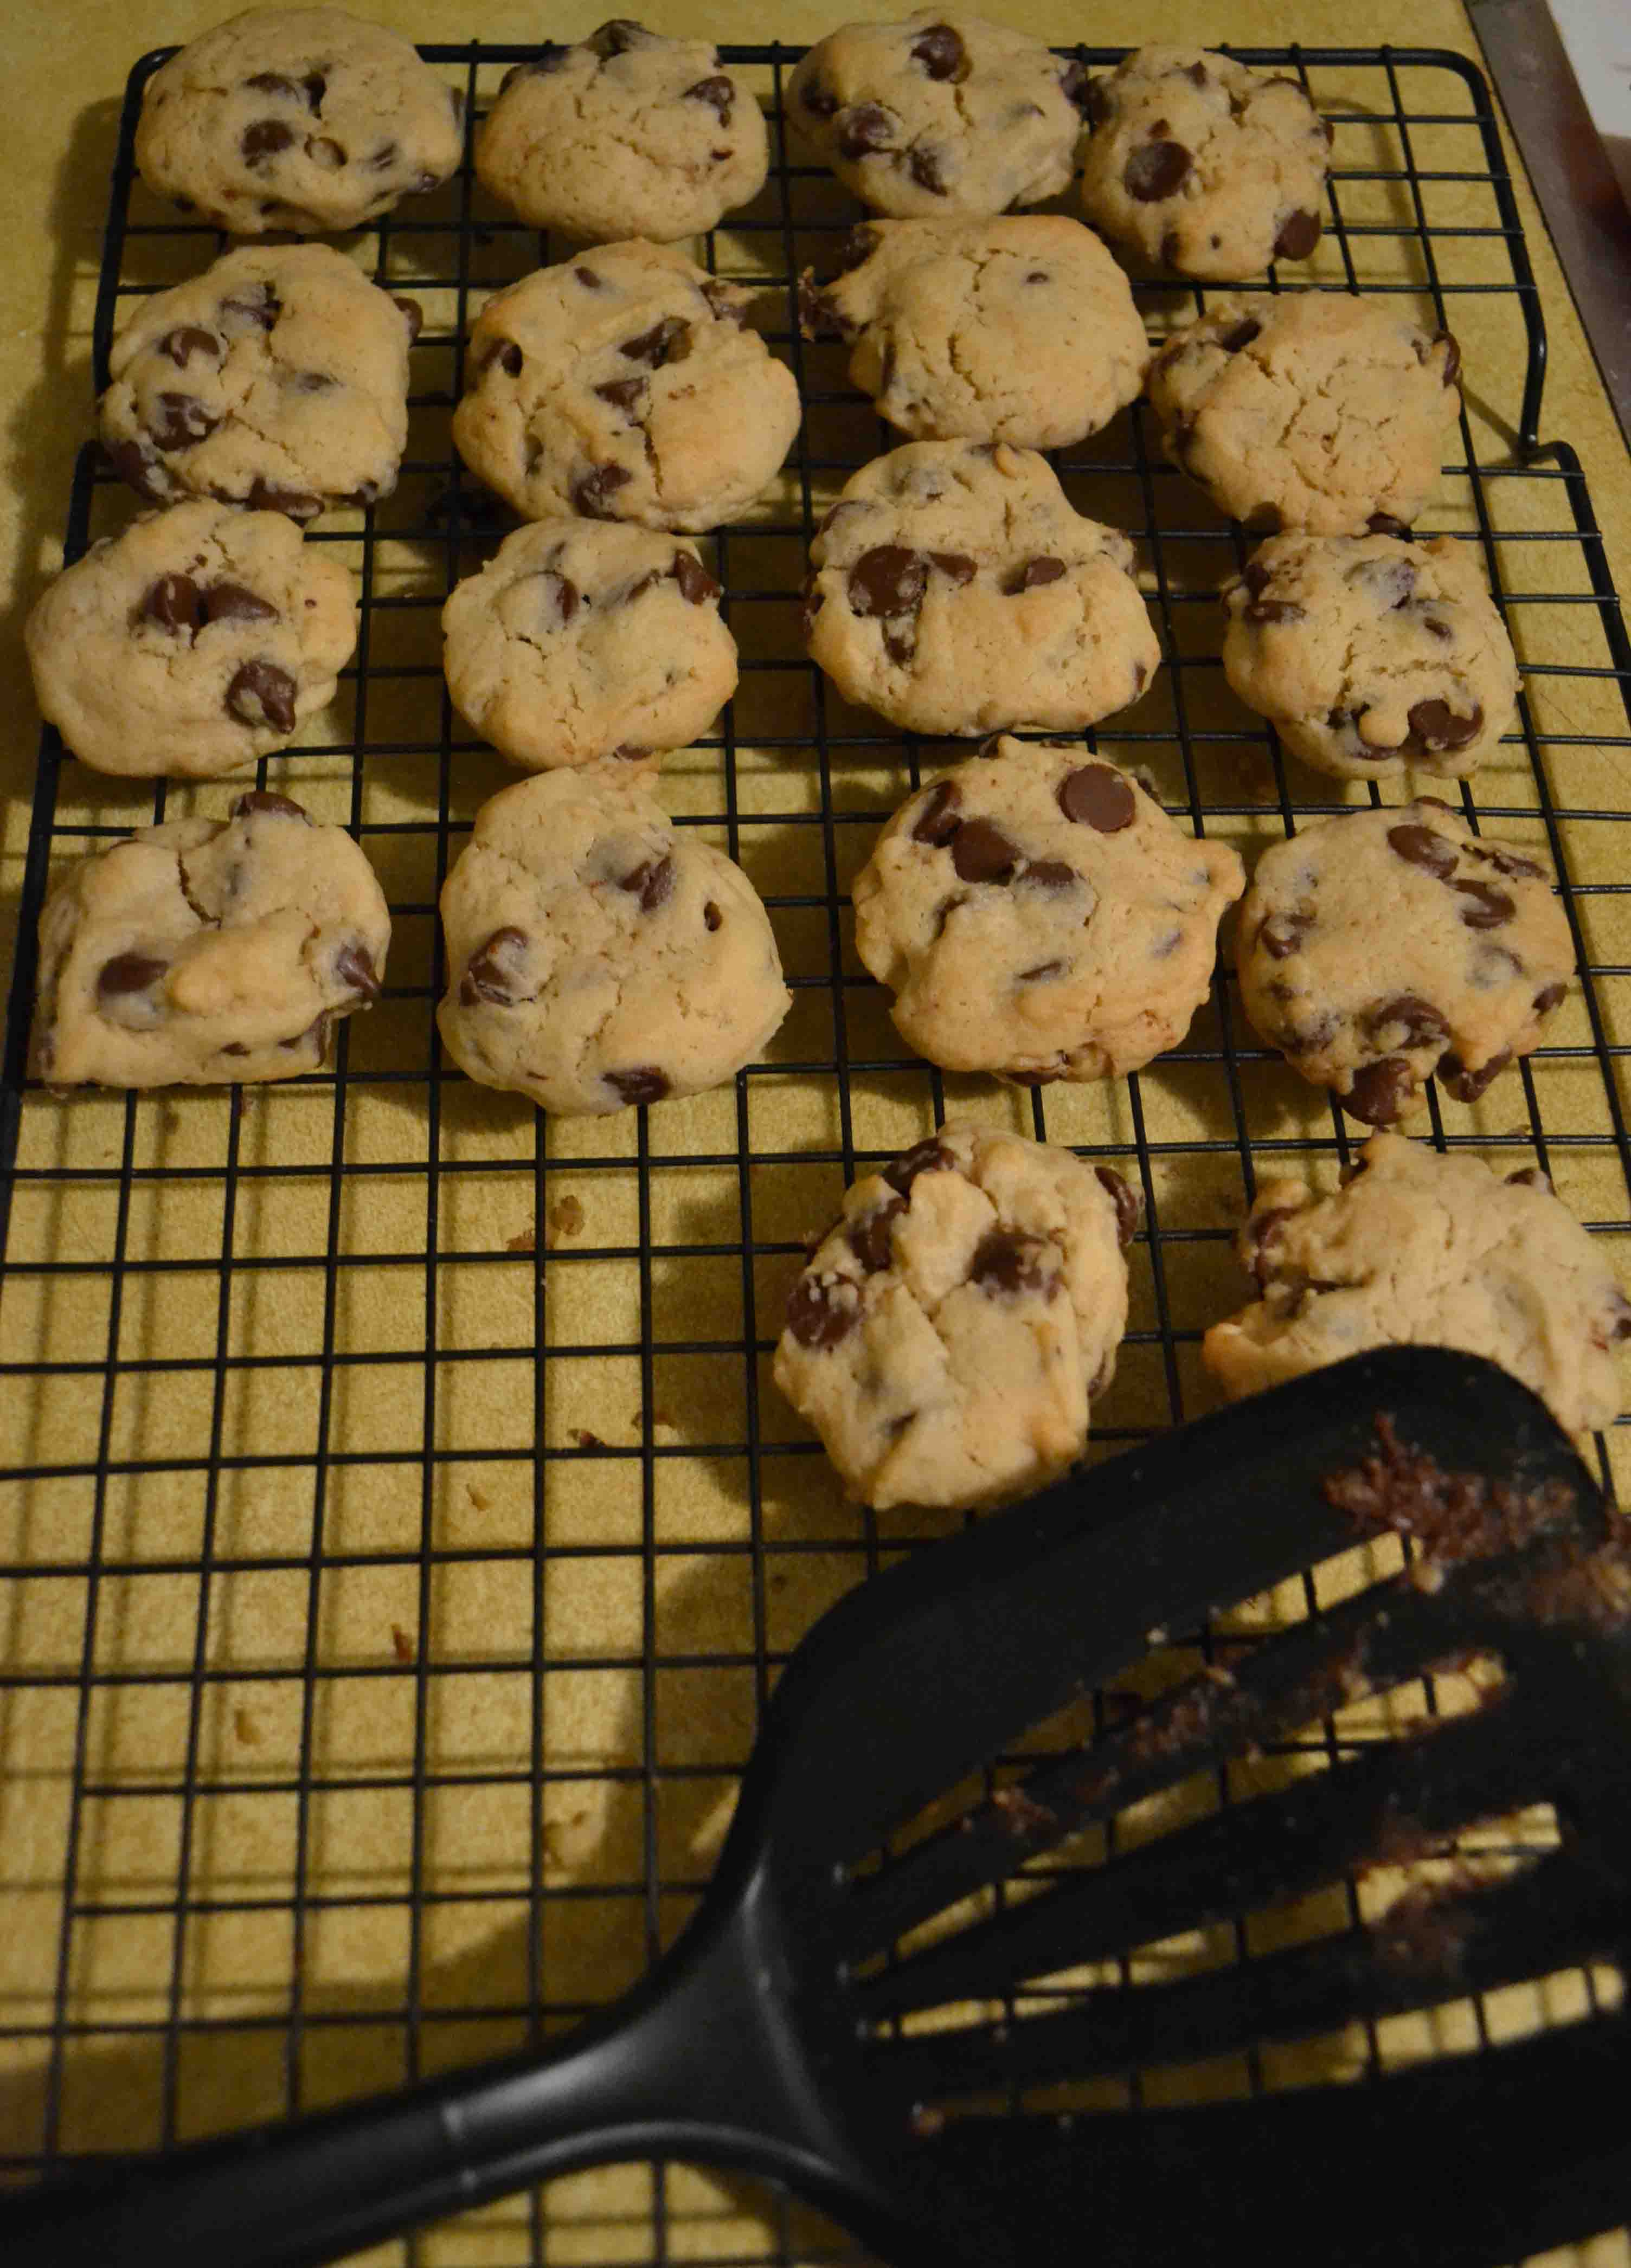 Sometimes, baking doesn't turn out looking pinterest-perfect. Here's my attempt at a new chocolate chip cookie recipe.